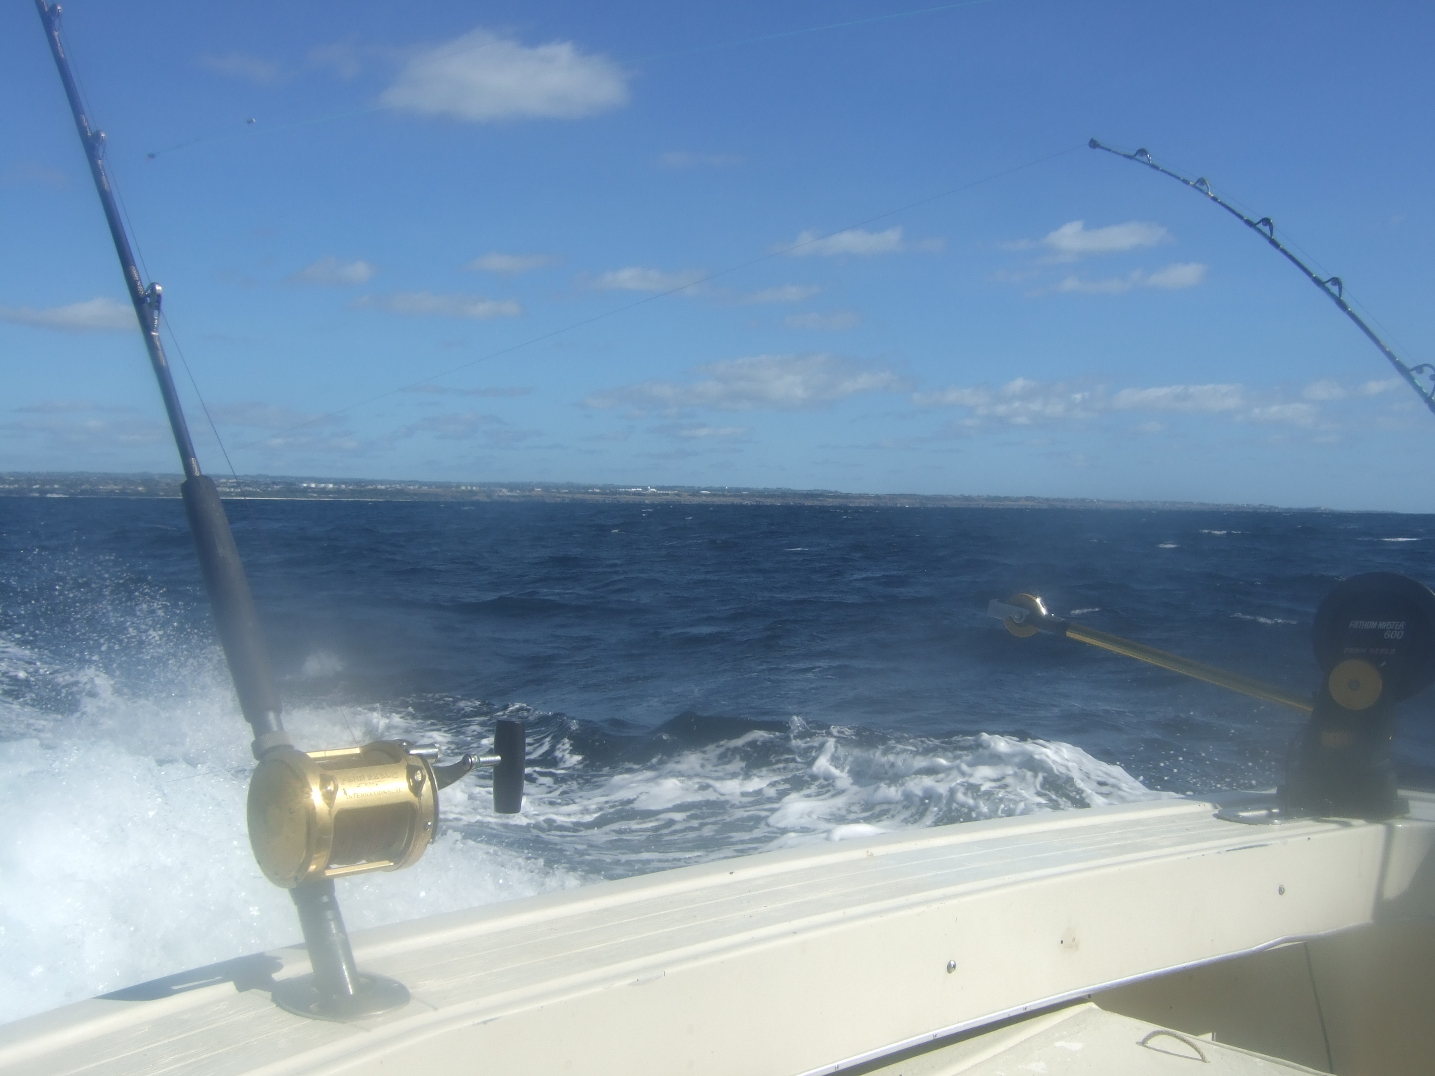 Description Charter boat rod fishing off the airport.JPG